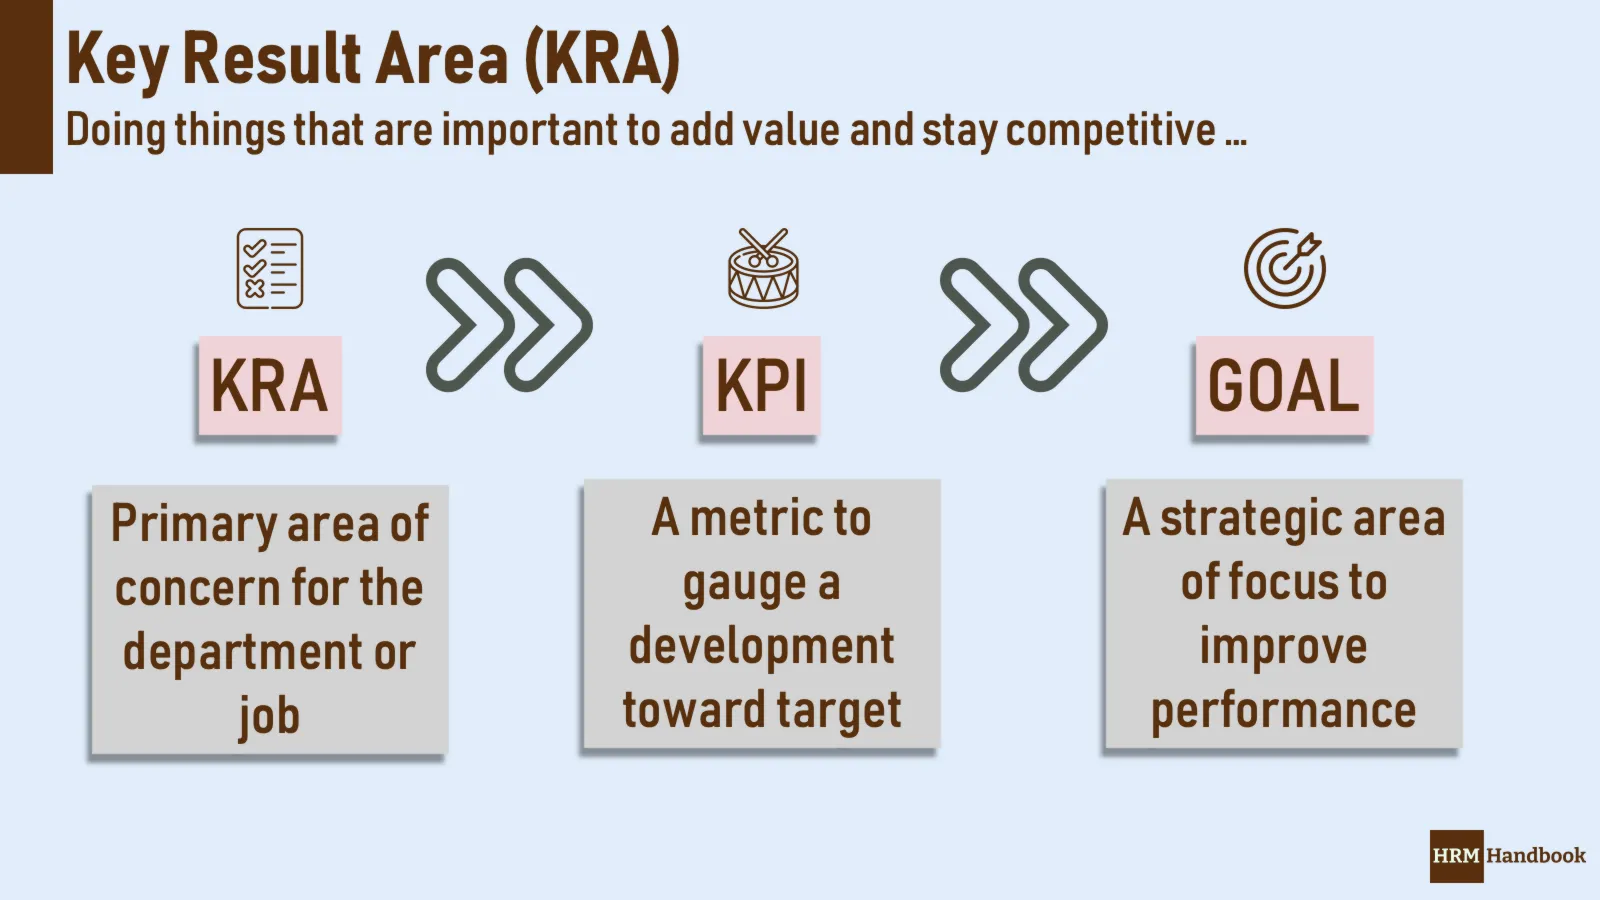 Key Result Area: A difference among KRA, KPI and Goal